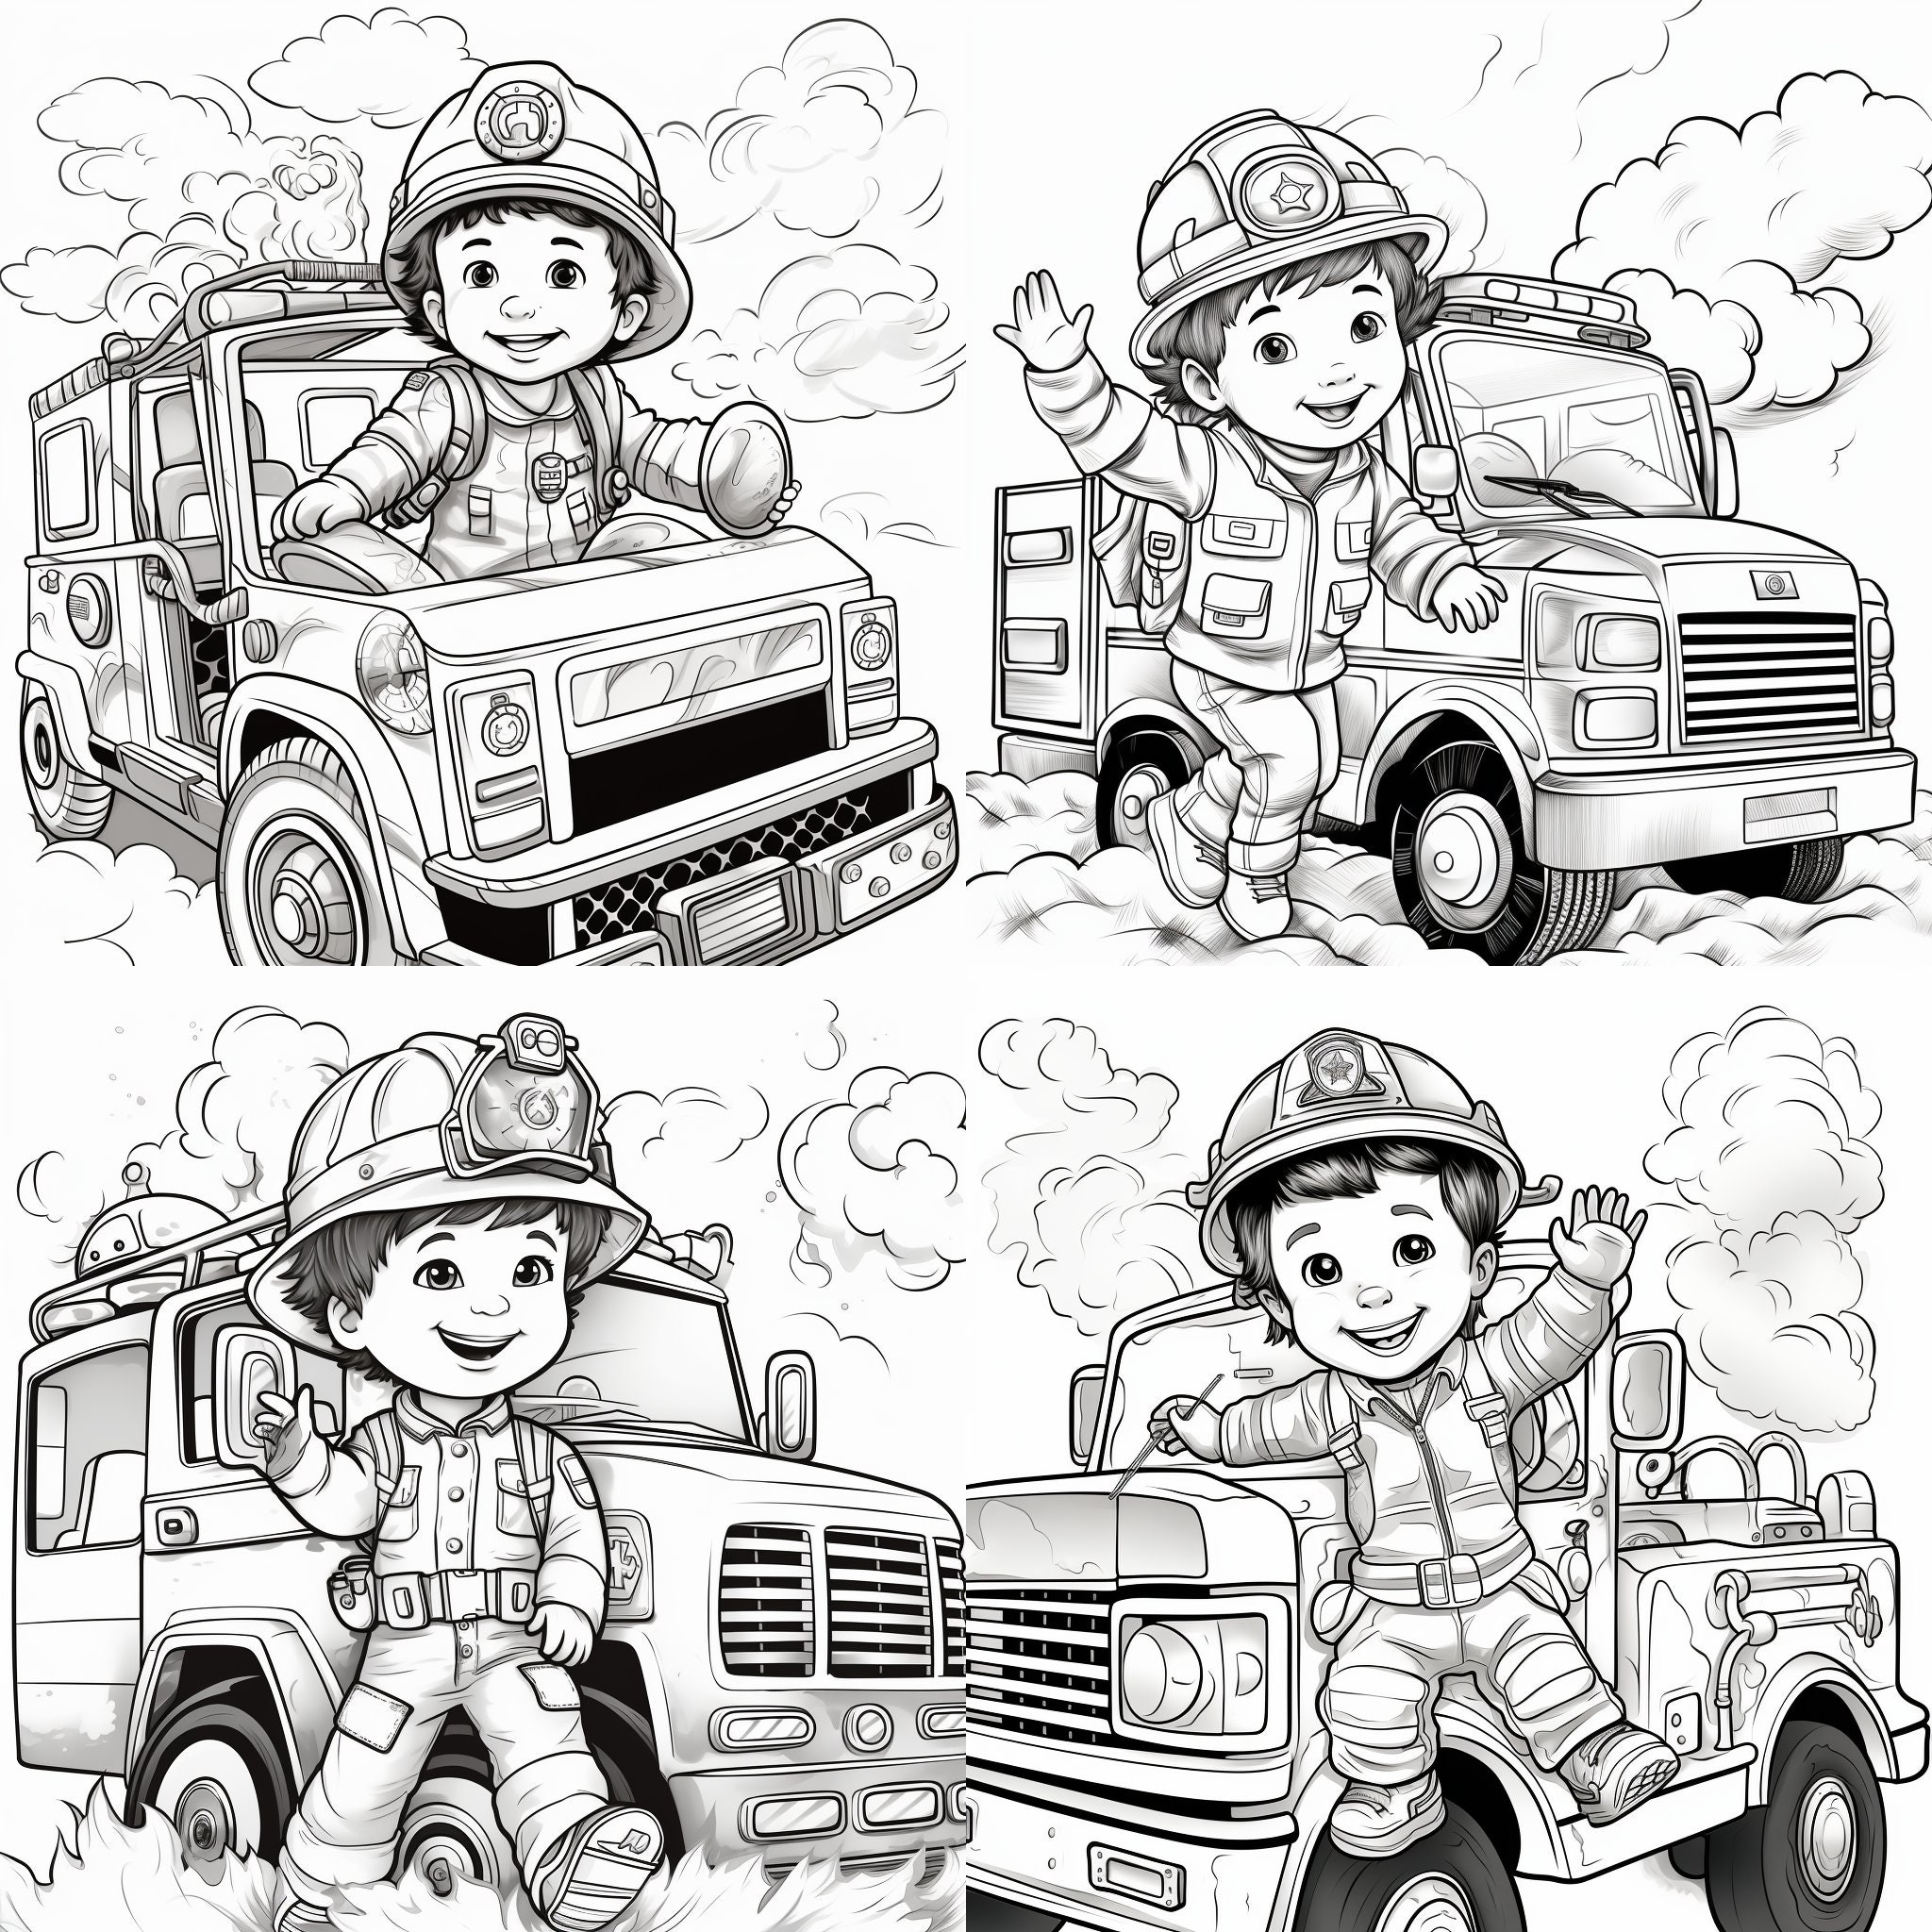 Fireman Coloring Toys, Reusable Coloring Book, Felt Coloring, Dry Erase  Coloring Dolls, Educational Toy 